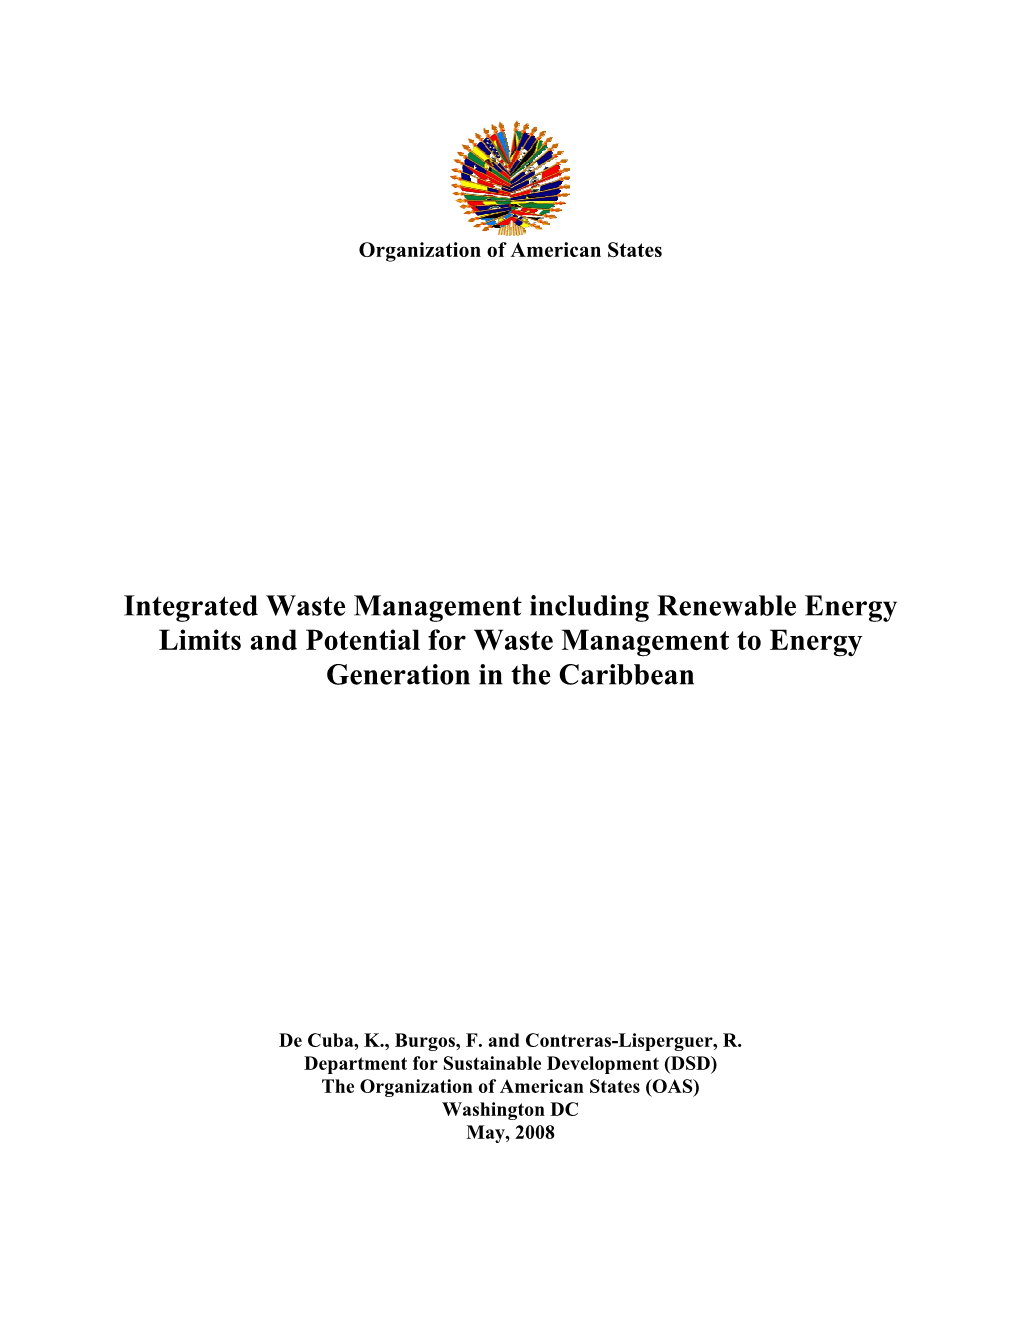 Integrated Waste Management Including Renewable Energy Limits and Potential for Waste Management to Energy Generation in the Caribbean